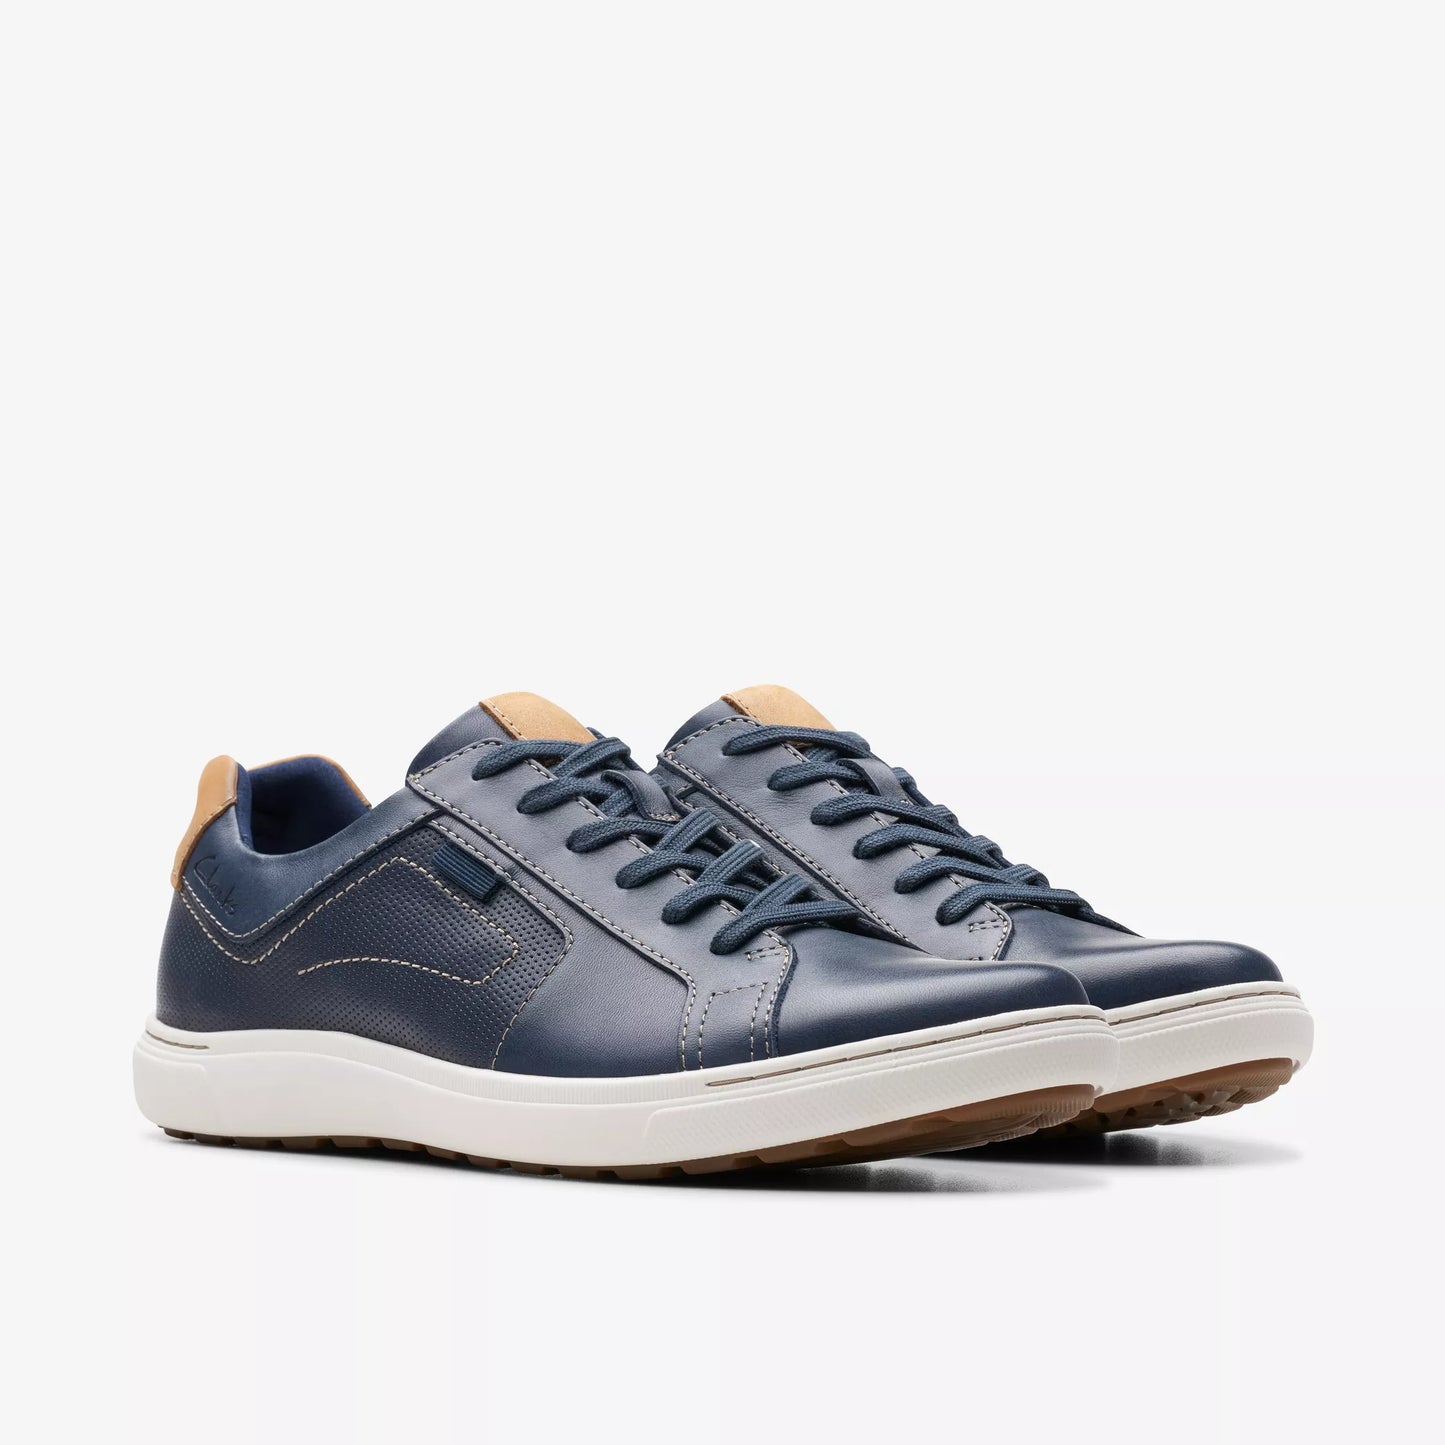 CLARKS | SABATES CASUALS PER A HOME | MAPSTONE LACE NAVY LEATHER | BLAVA